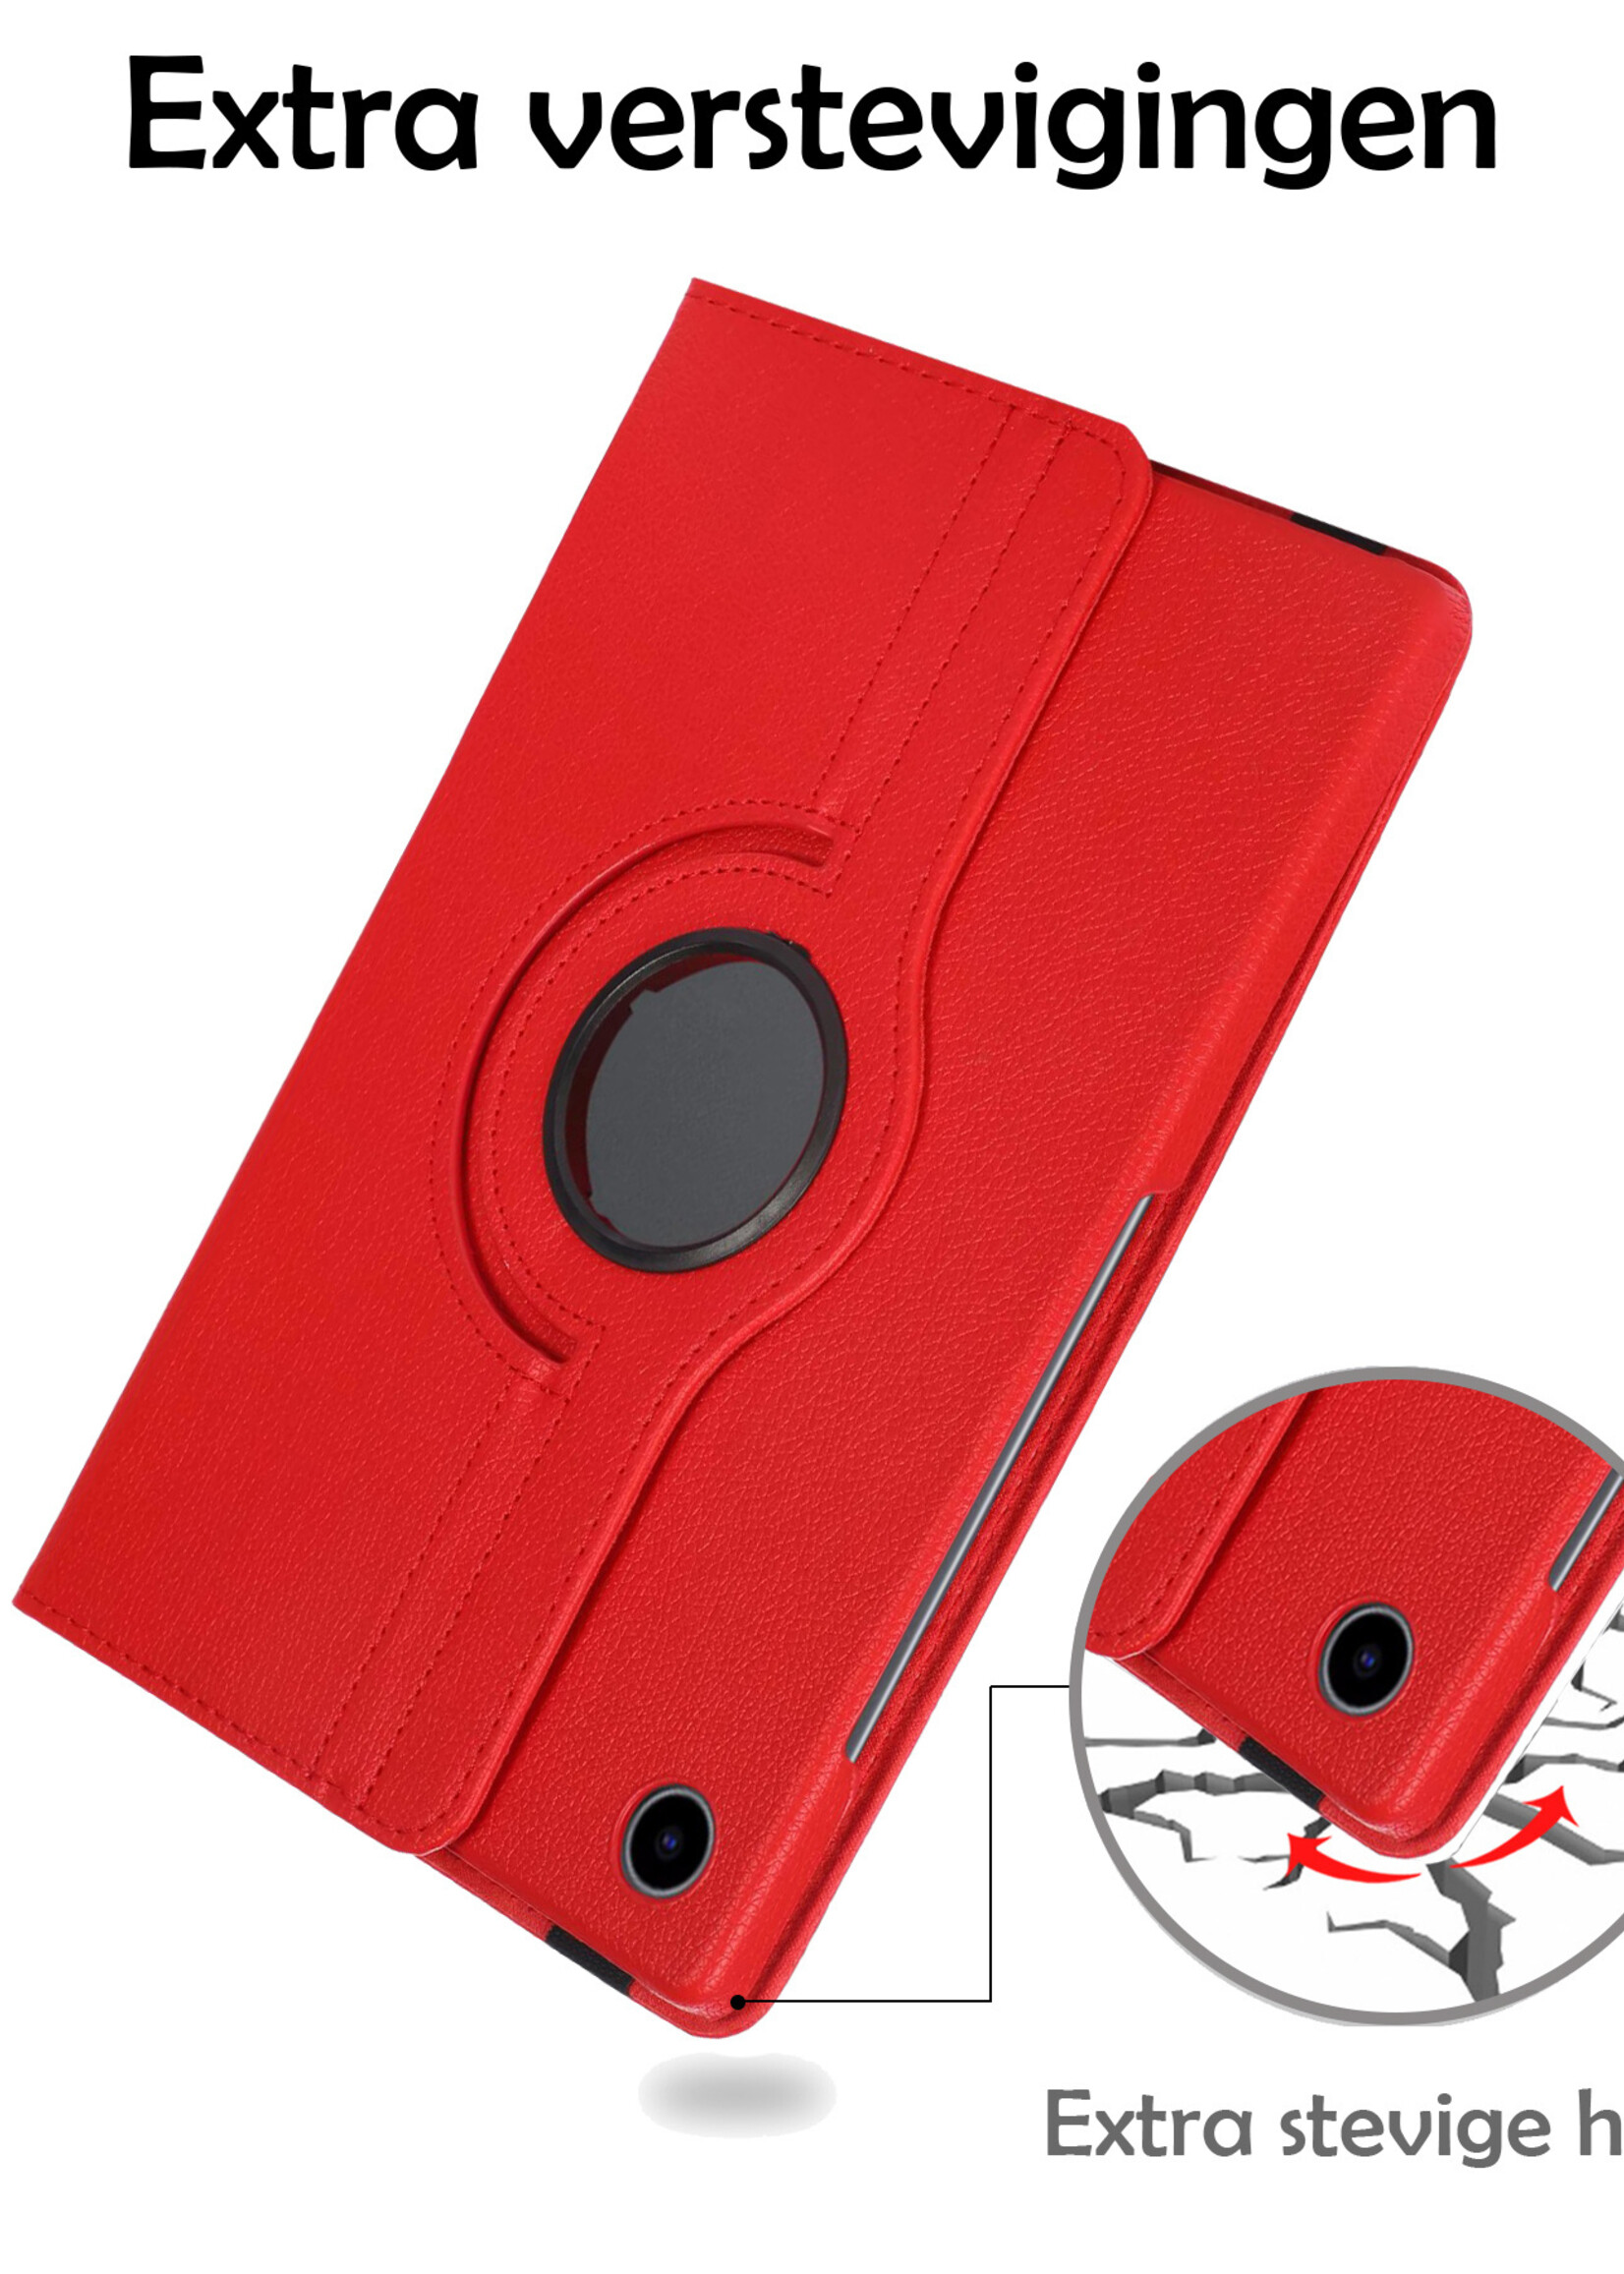 LUQ Hoes Geschikt voor Samsung Galaxy Tab A8 Hoes 360 Draaibaar Hoesje Case - Hoesje Geschikt voor Samsung Tab A8 Hoes Cover - Rood